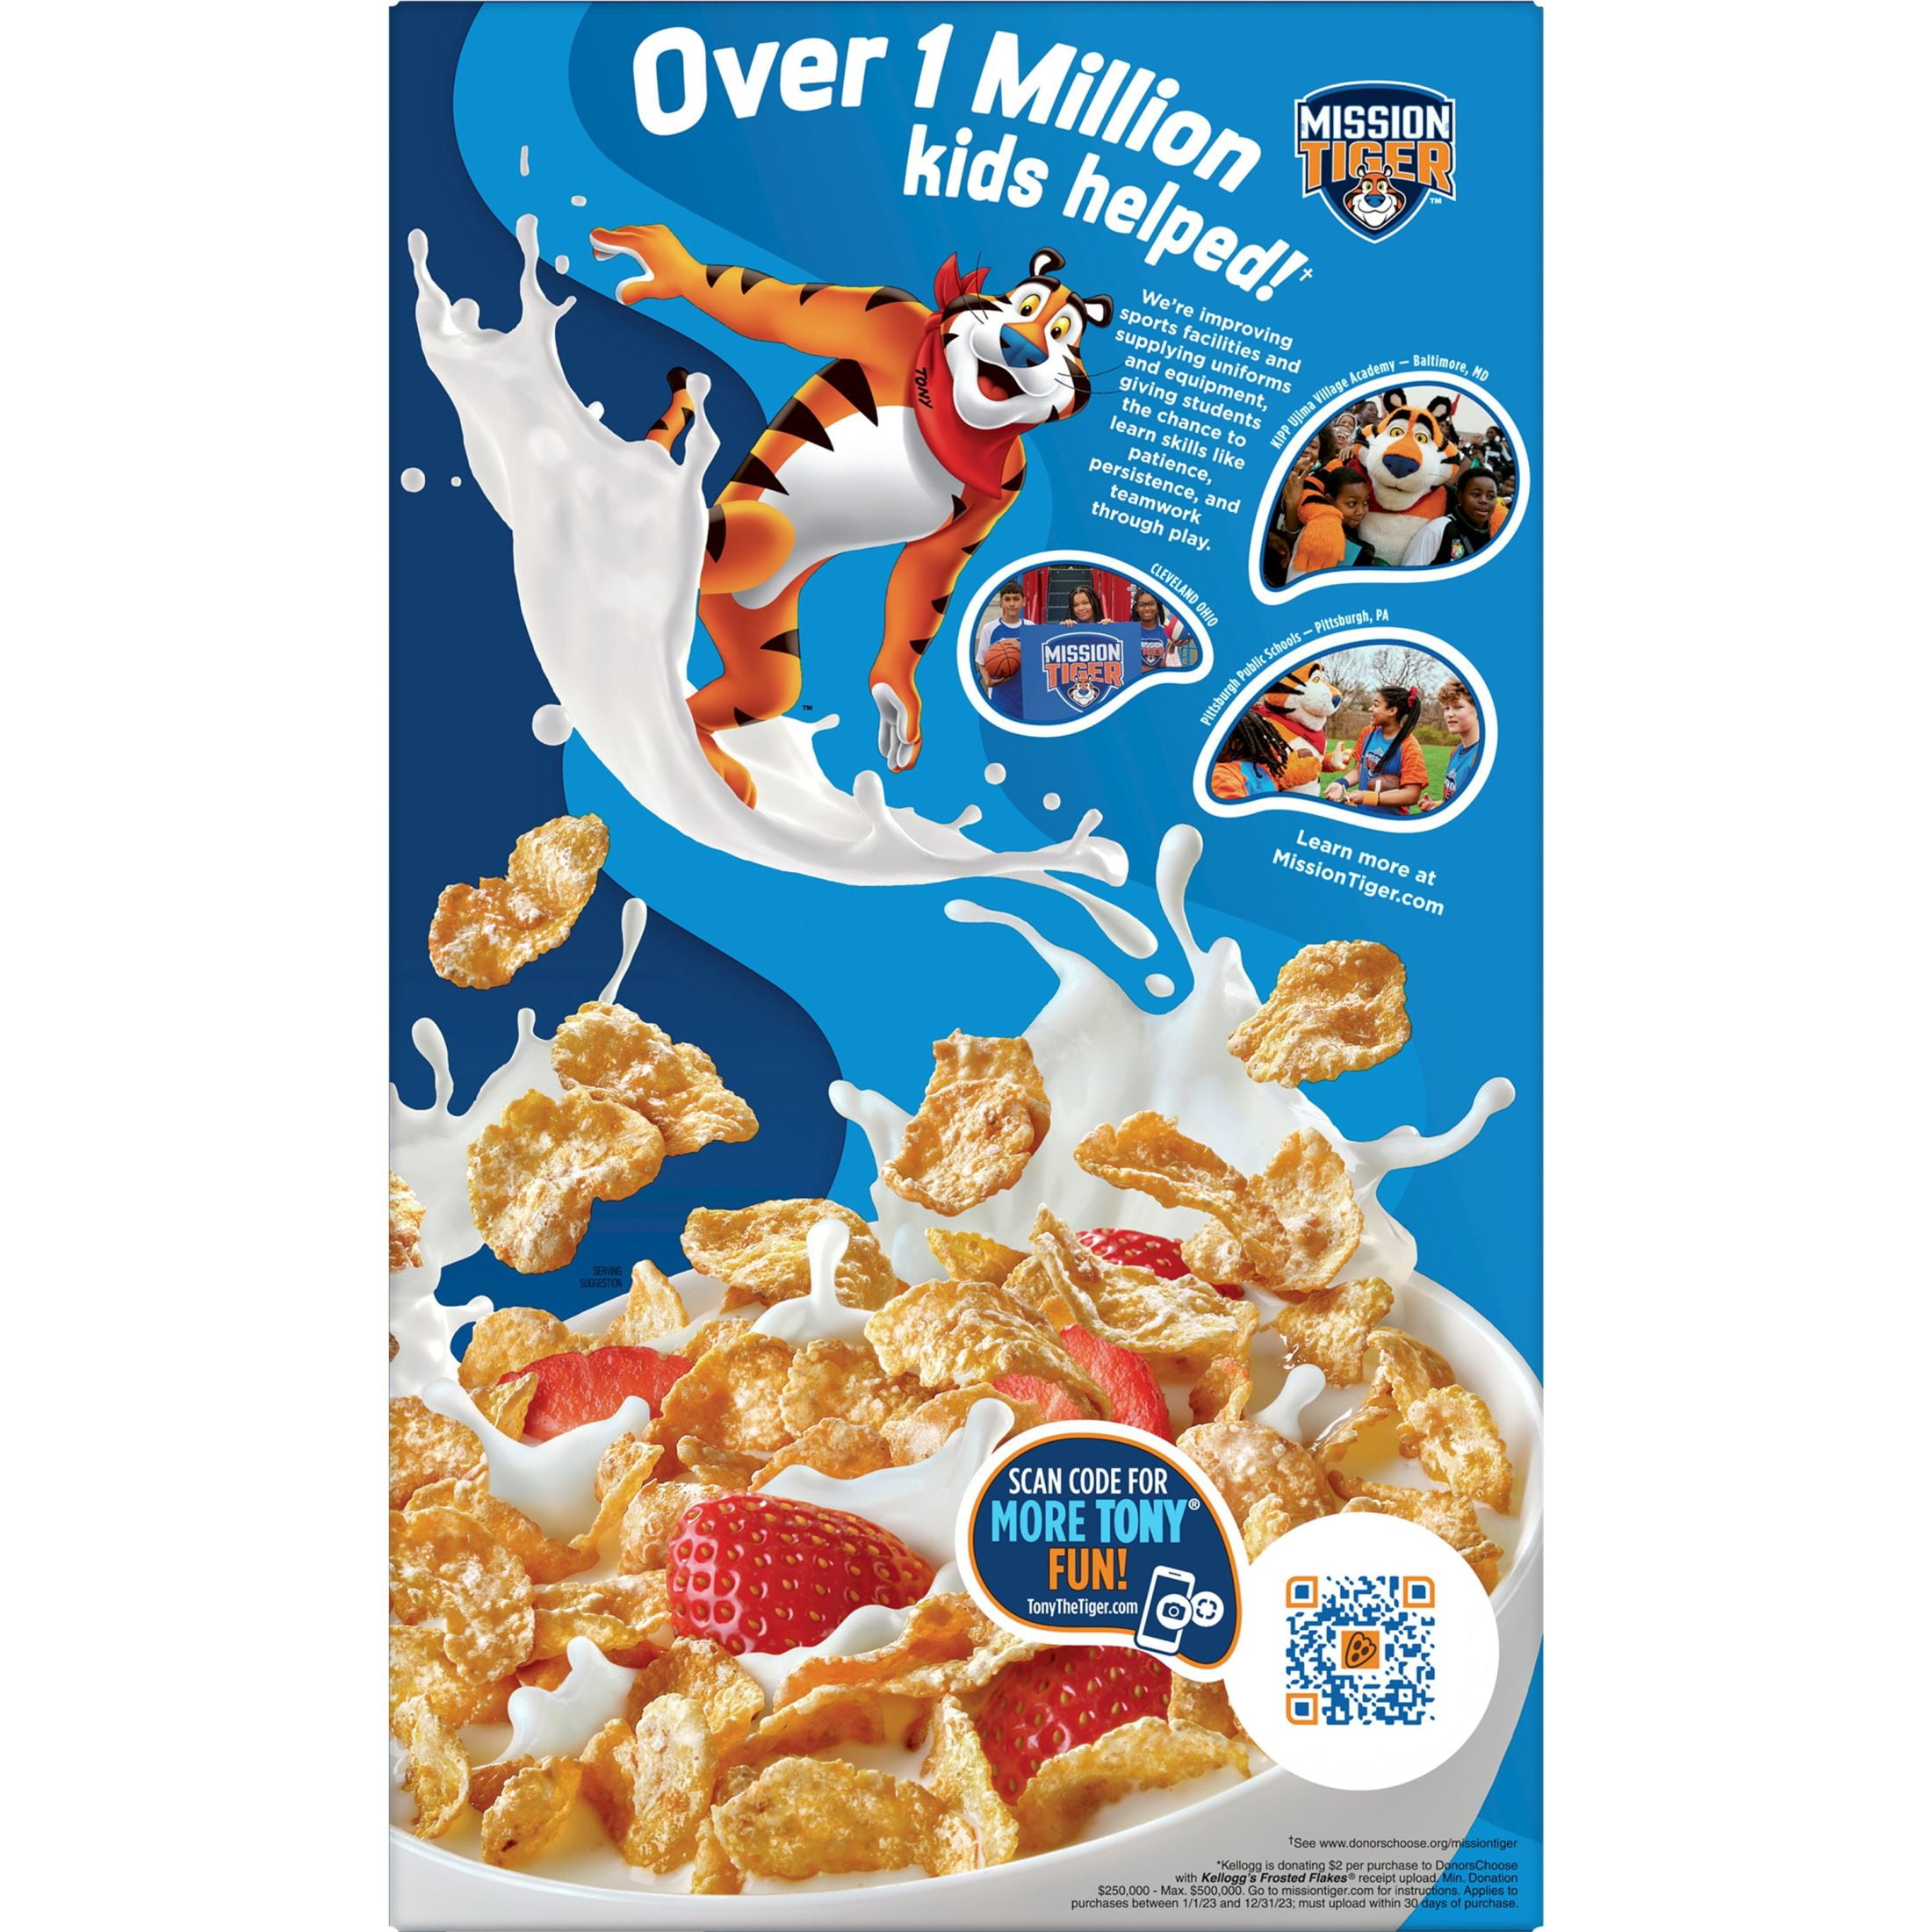 Kelloggs Frosted Flakes Of Corn Value Size Packaging Stock Photo - Download  Image Now - iStock